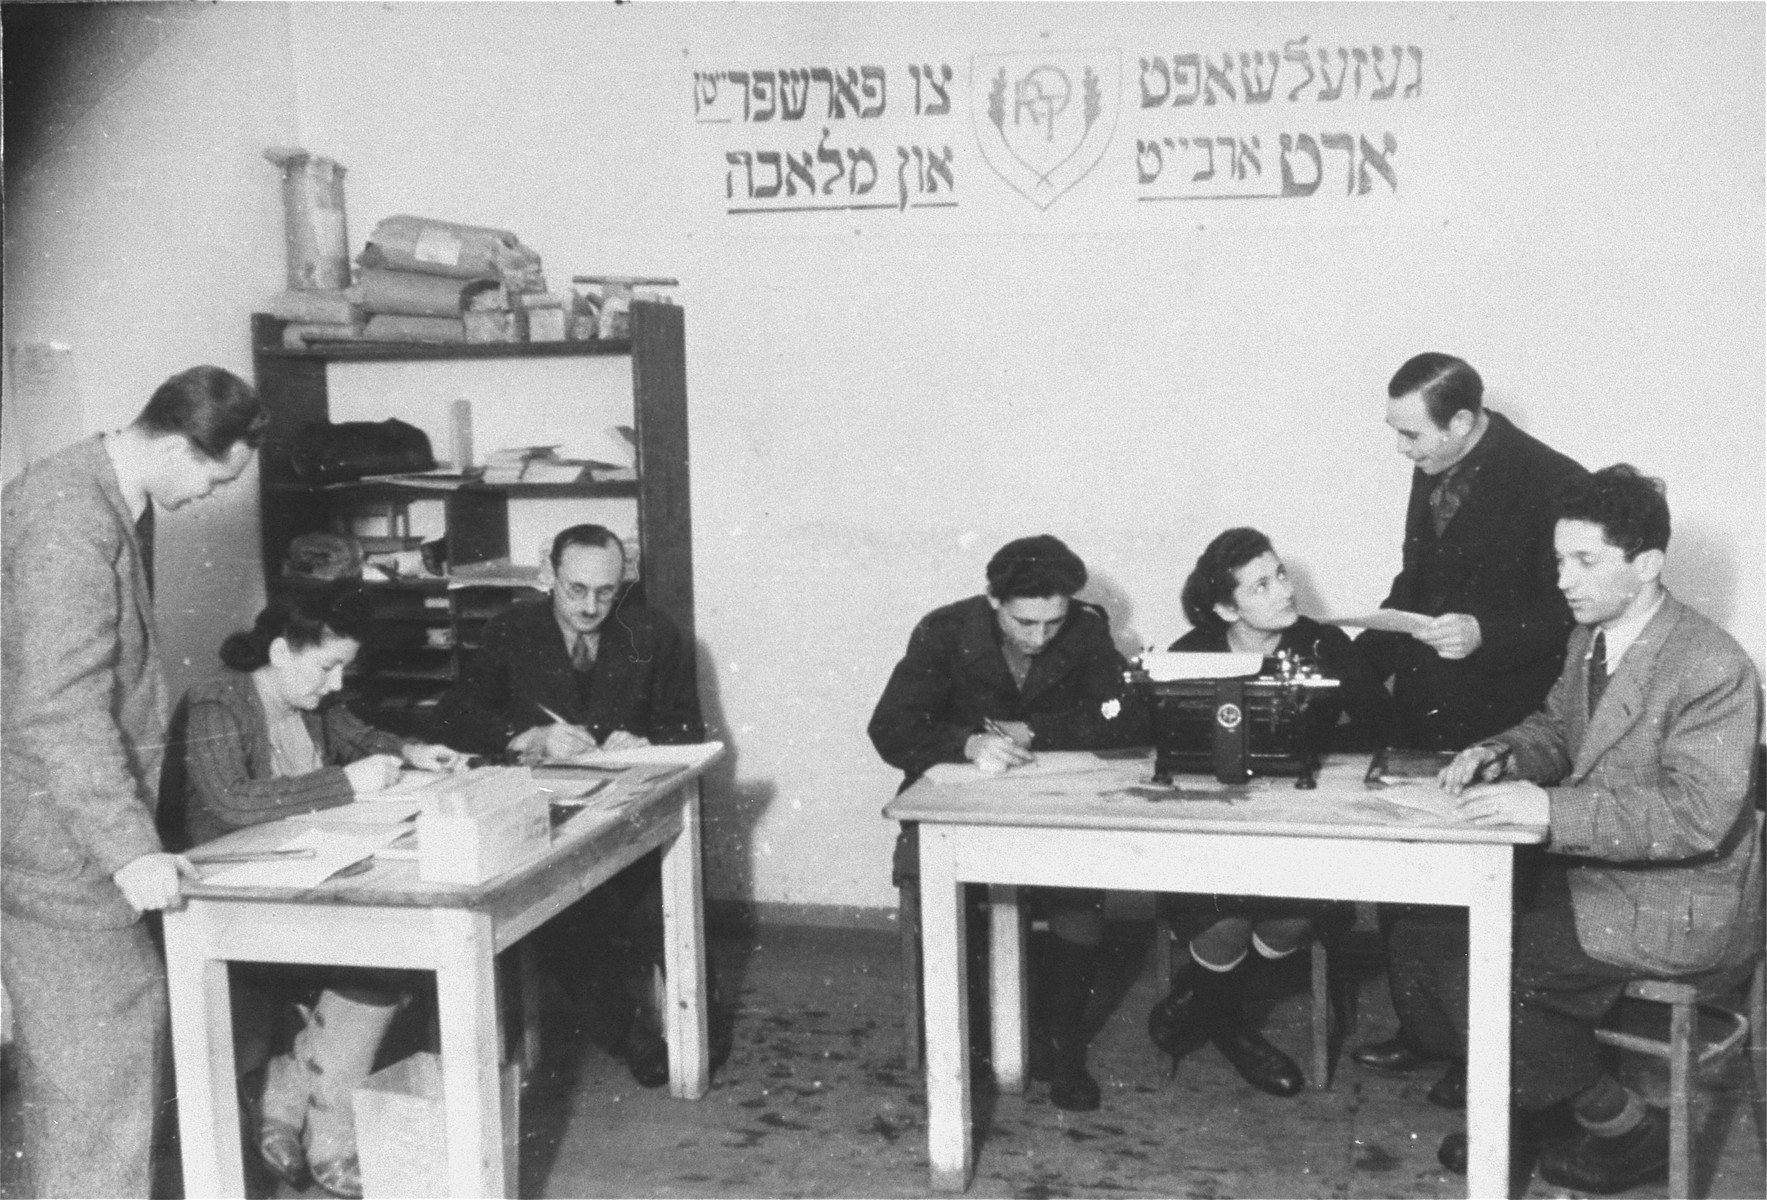 ORT office in the camp.
The man pictured on the right speaking to the secretary is Jana Wisgardisky.